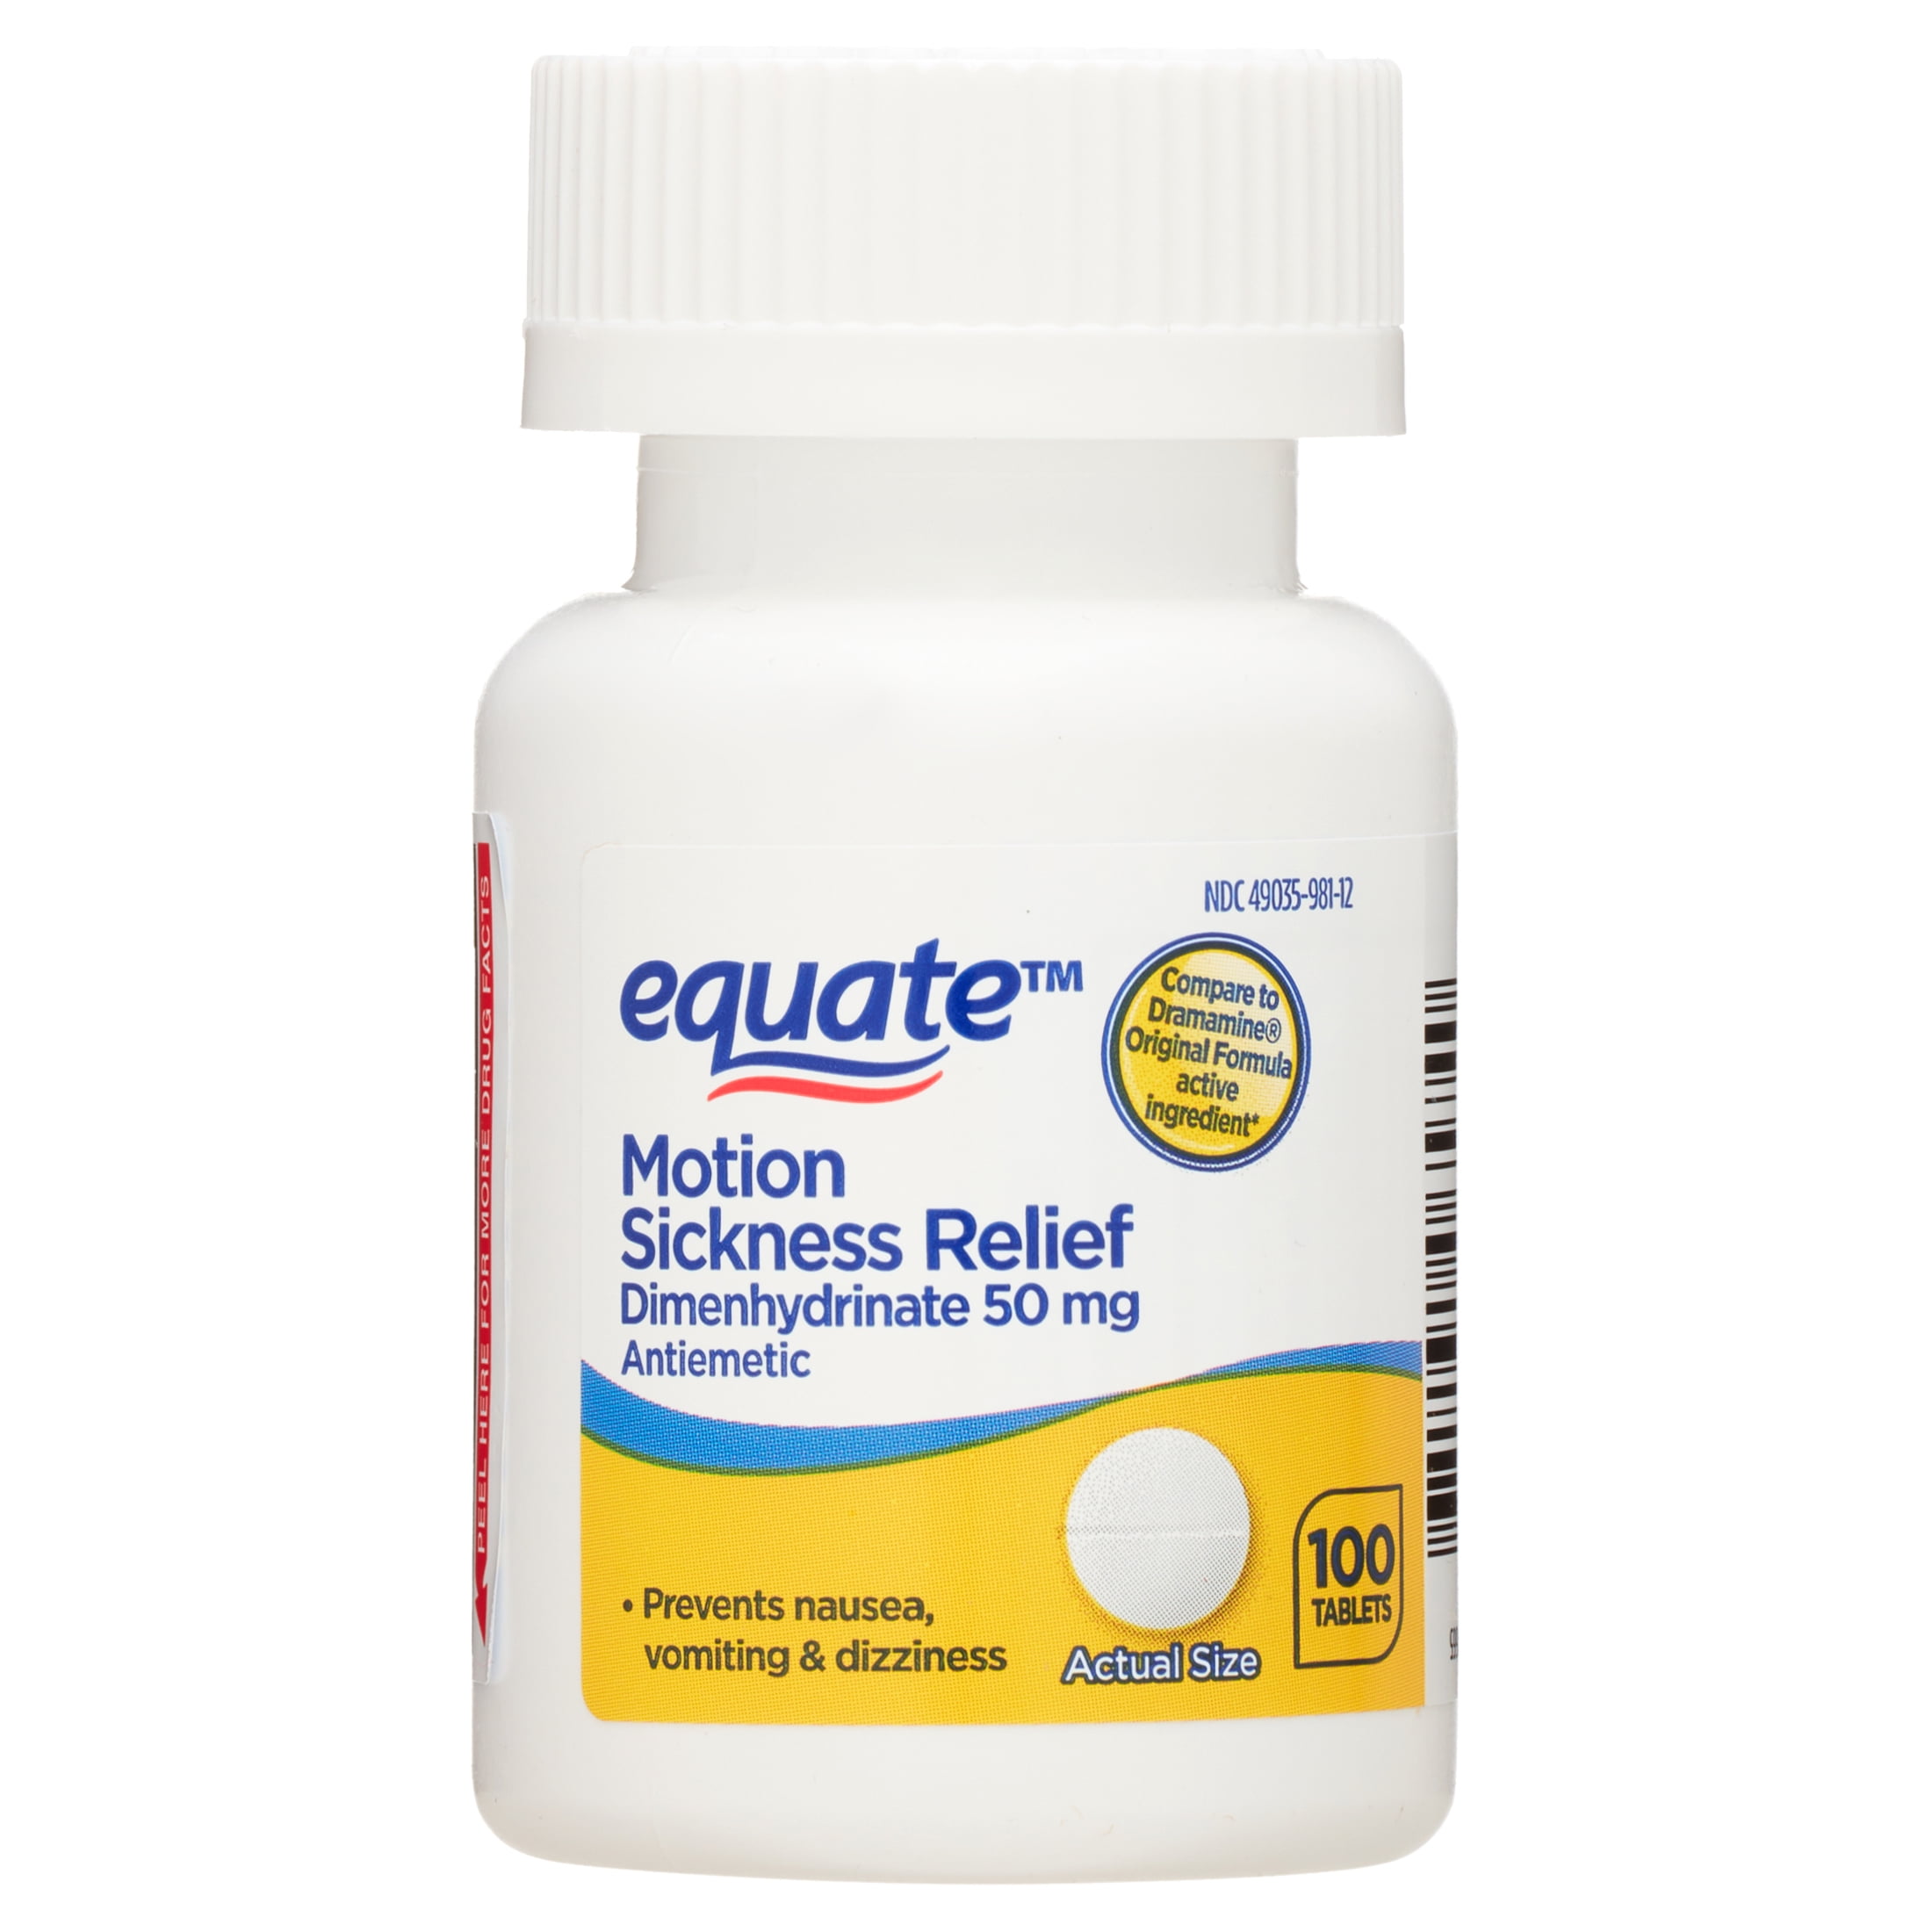 Equate Fast-Acting Motion Sickness Relief Dimenhydrinate Tablets, 50 mg, 100 Count